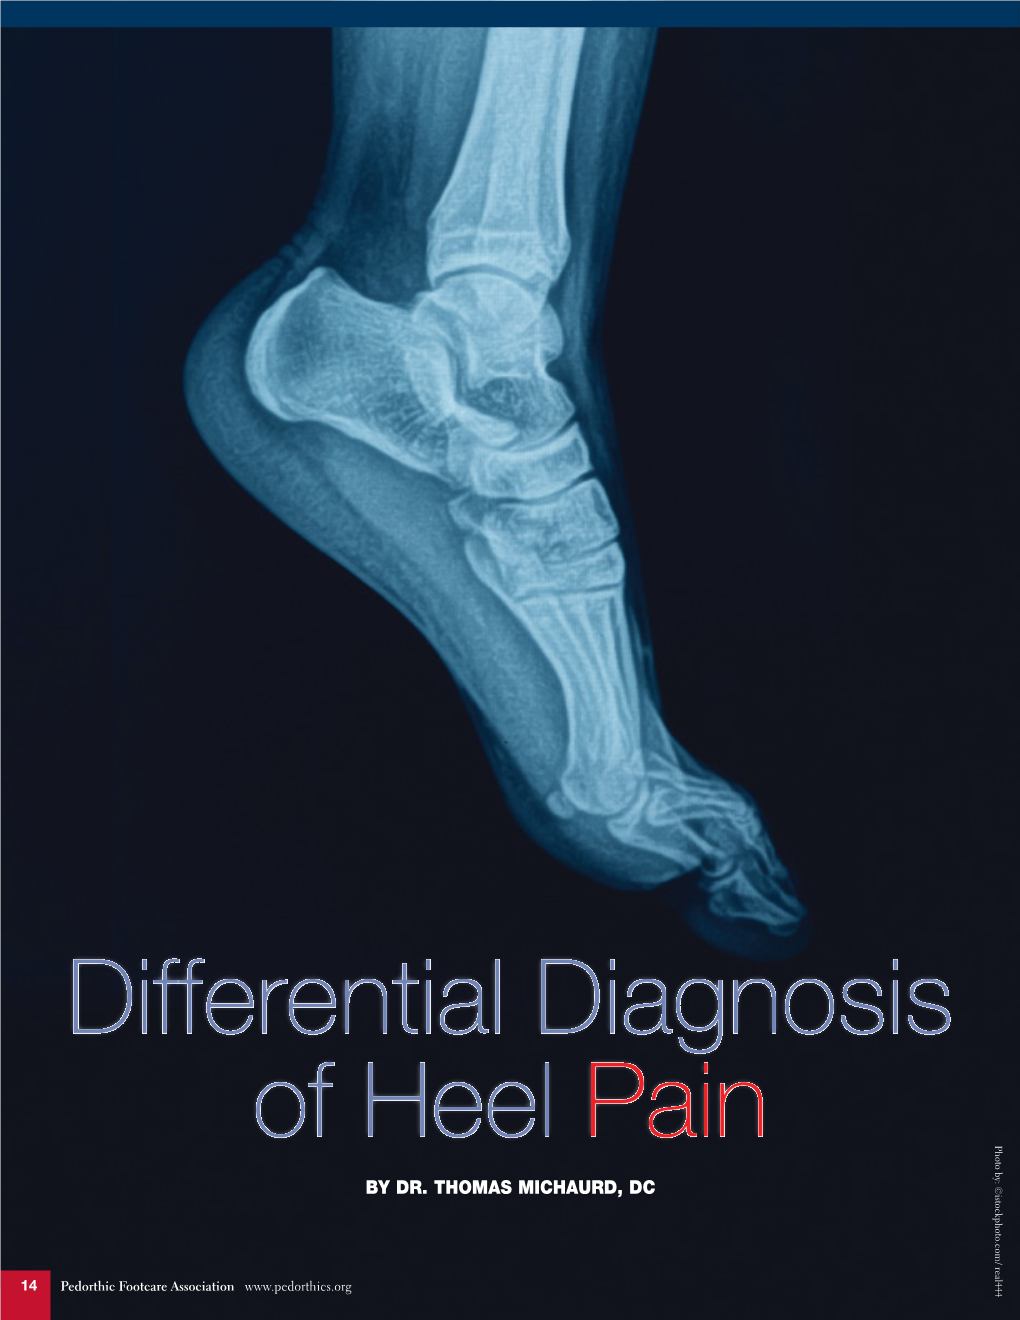 Differential Diagnosis of Heel Pain